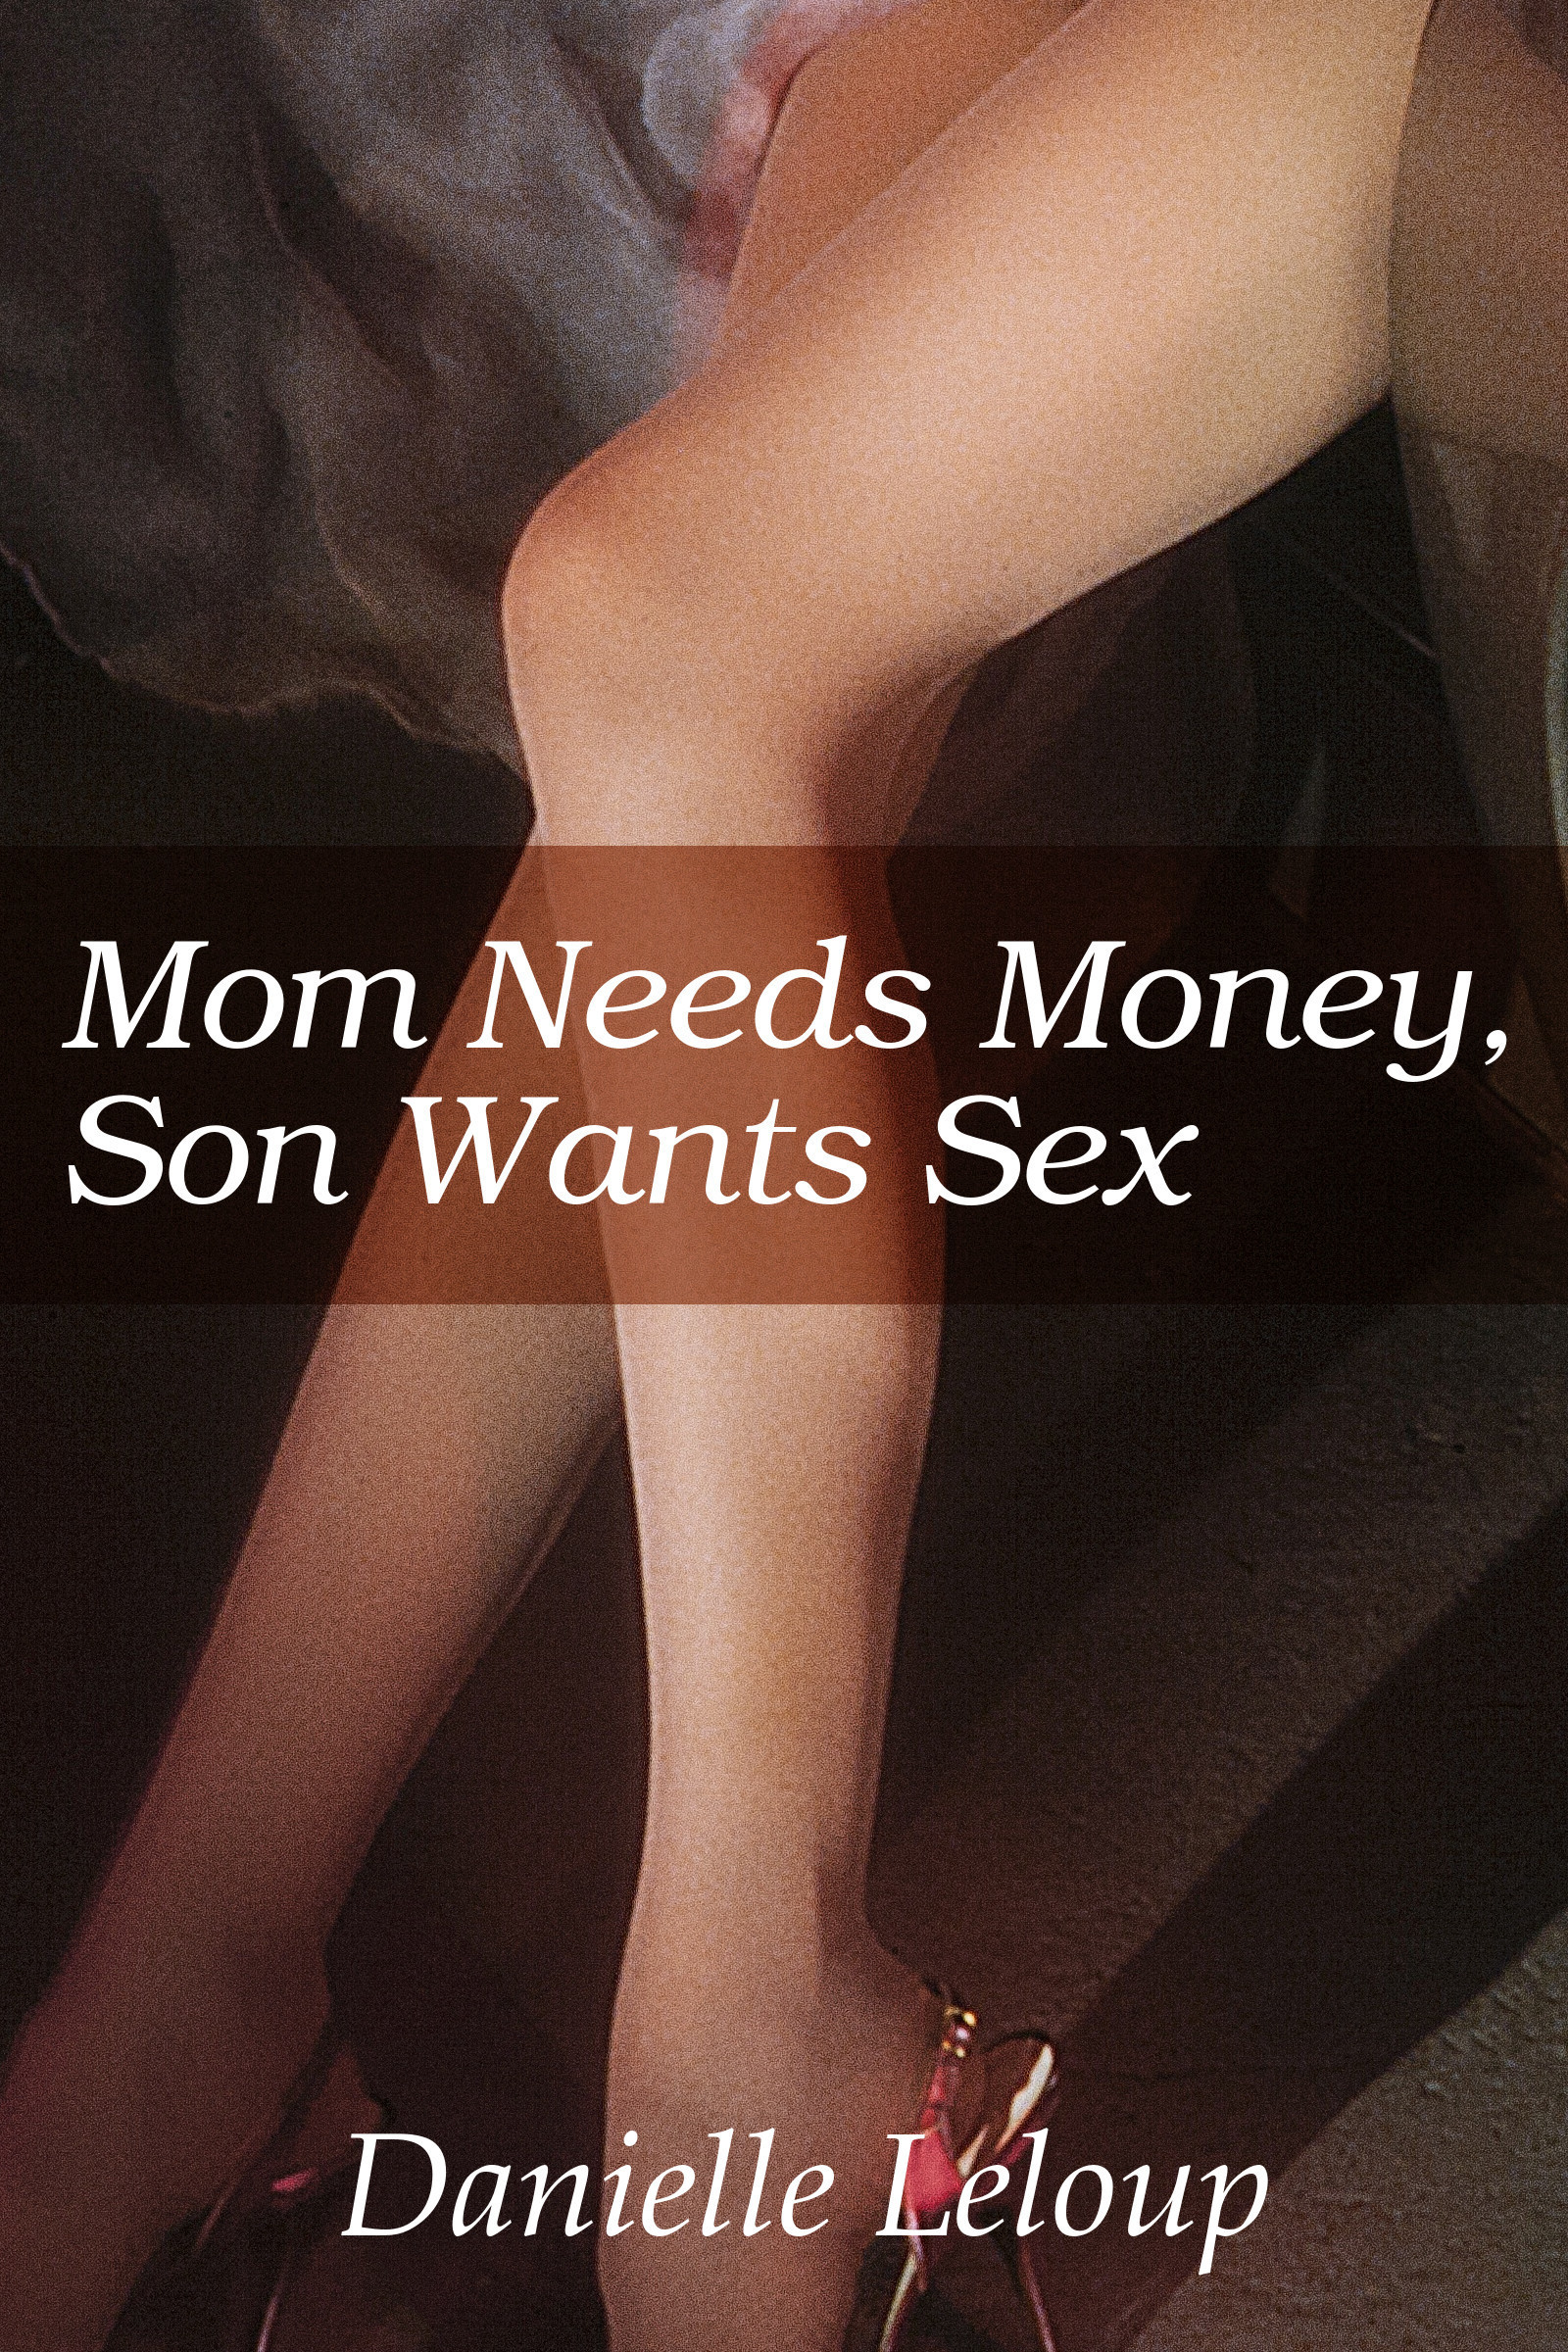 mom wants sex with son